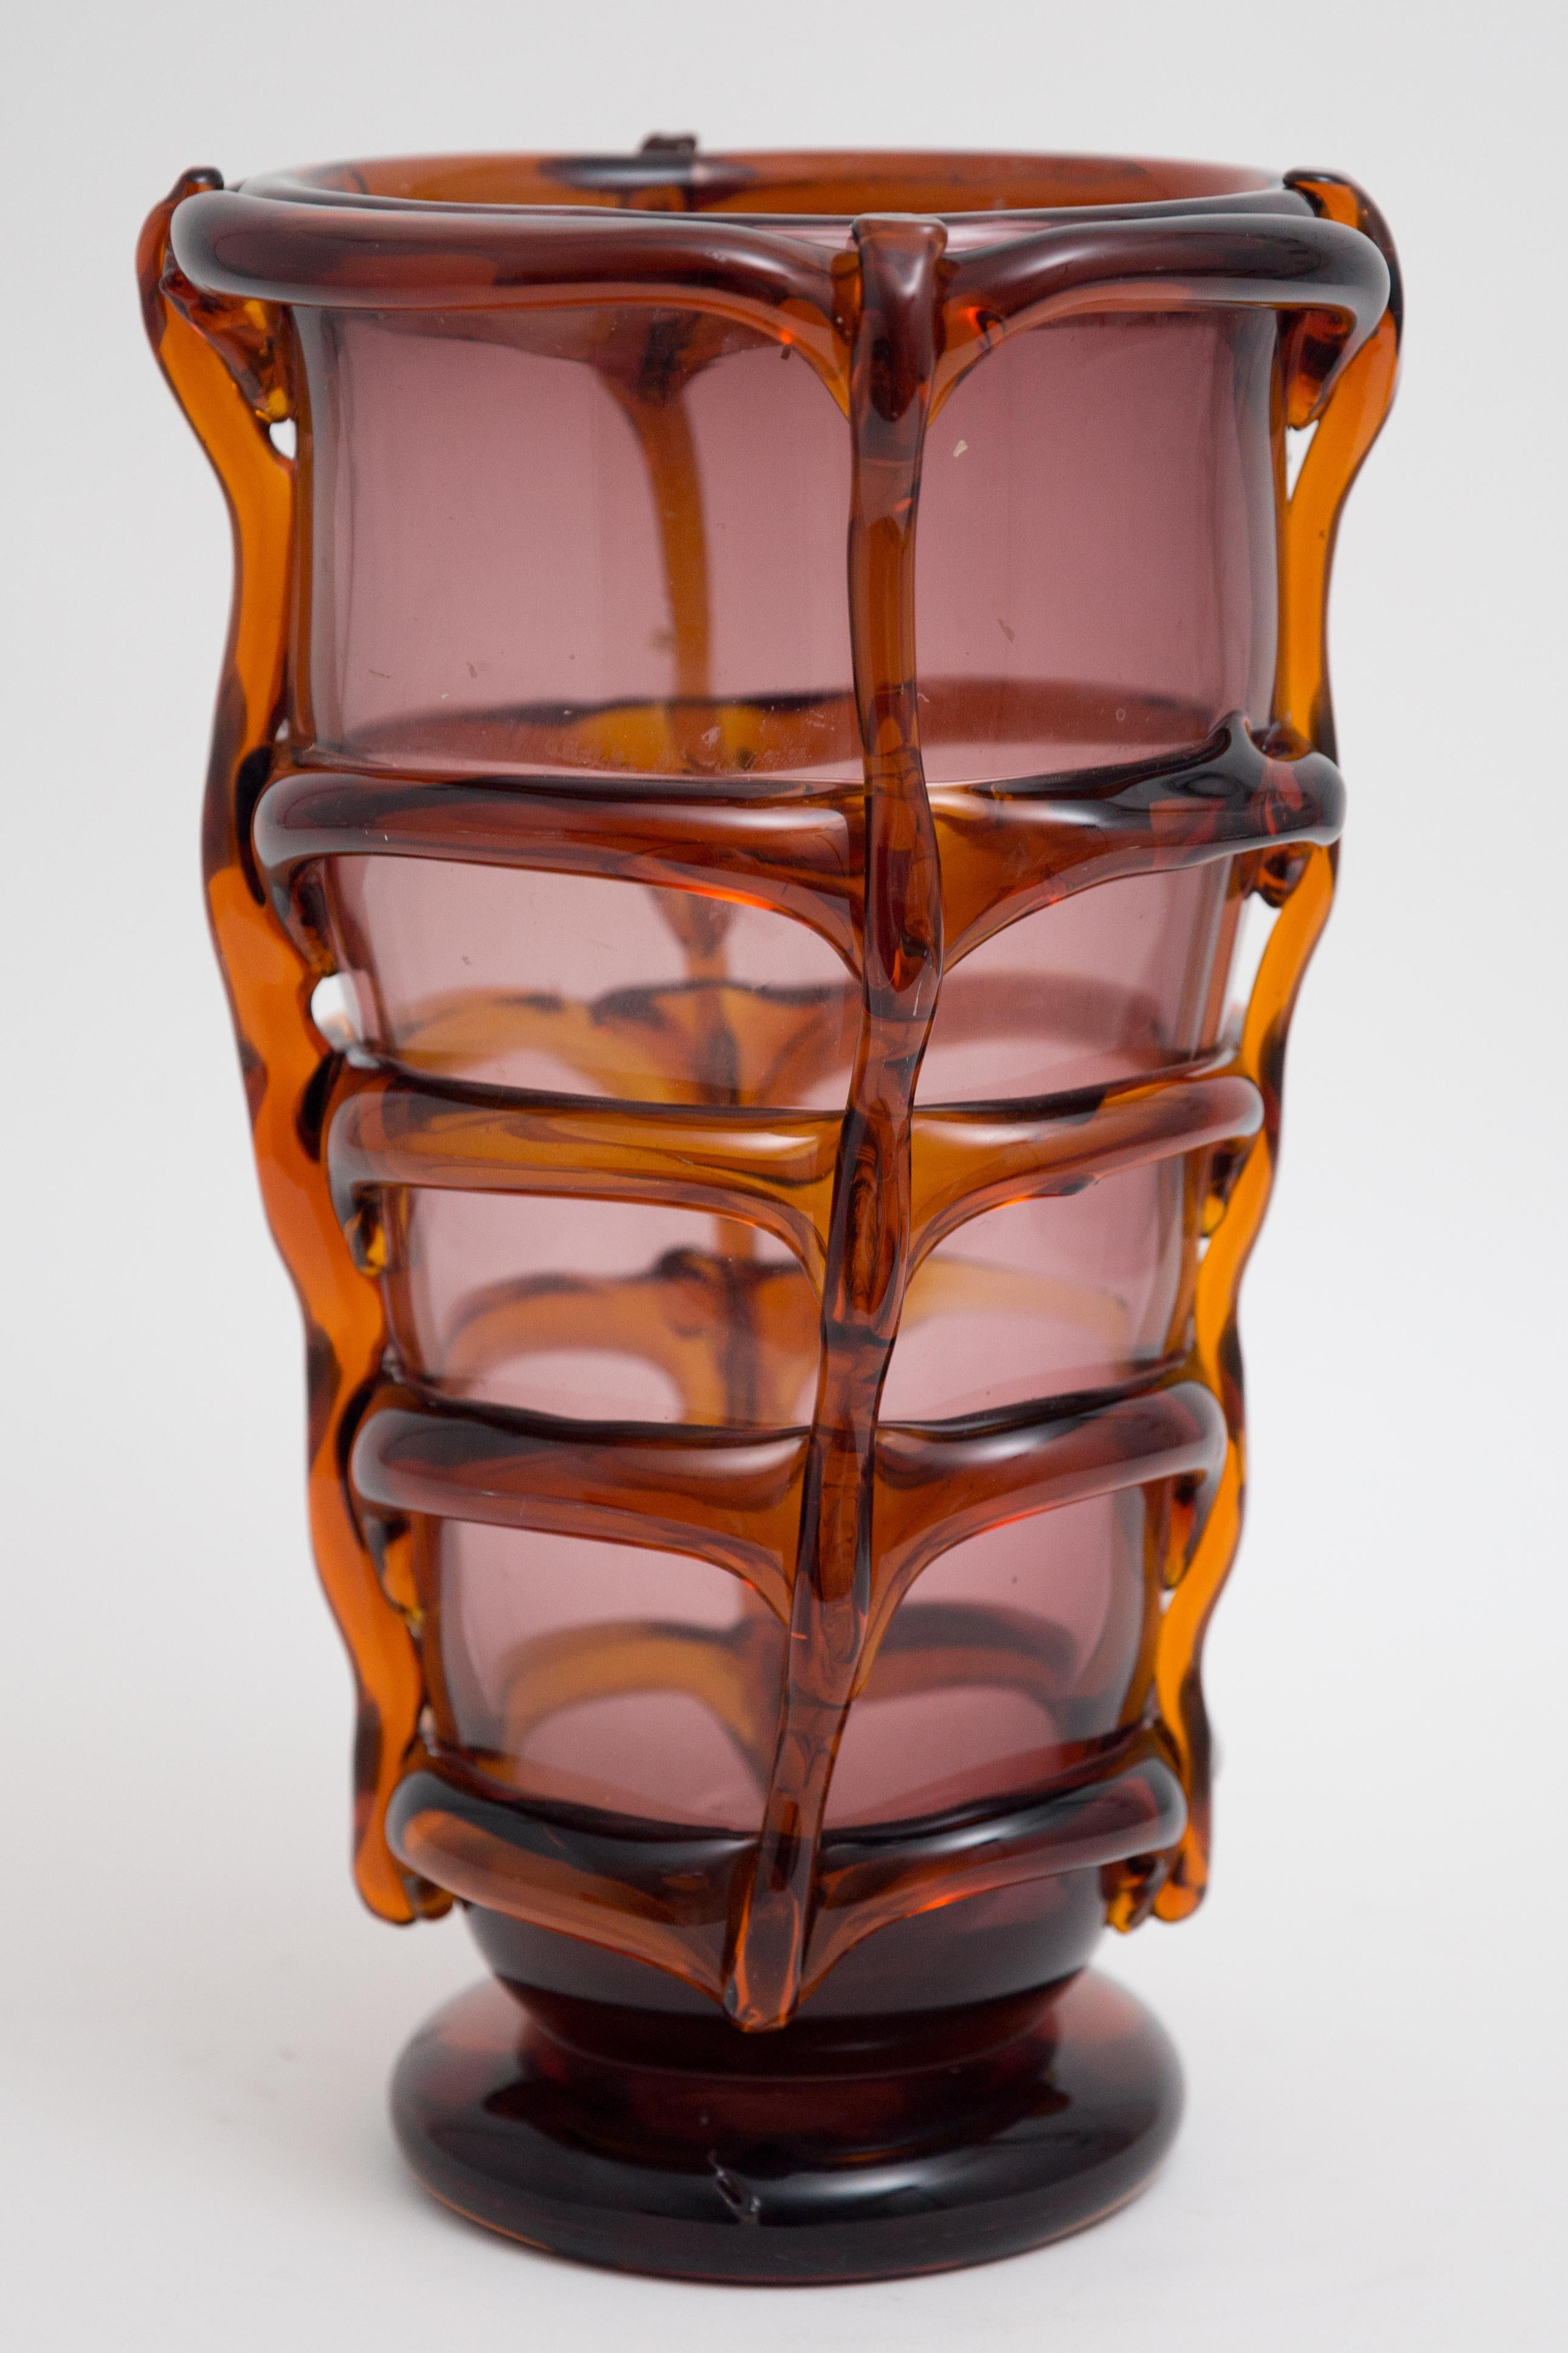 Offered is a midcentury large hand blown one of a kind art glass vase attributed to Flavio Poli. Flavio Poli was an Italian glass designer known for his masterful vases and lamps. Born in 1900 in Chioggia, Italy, Poli received his formal training at